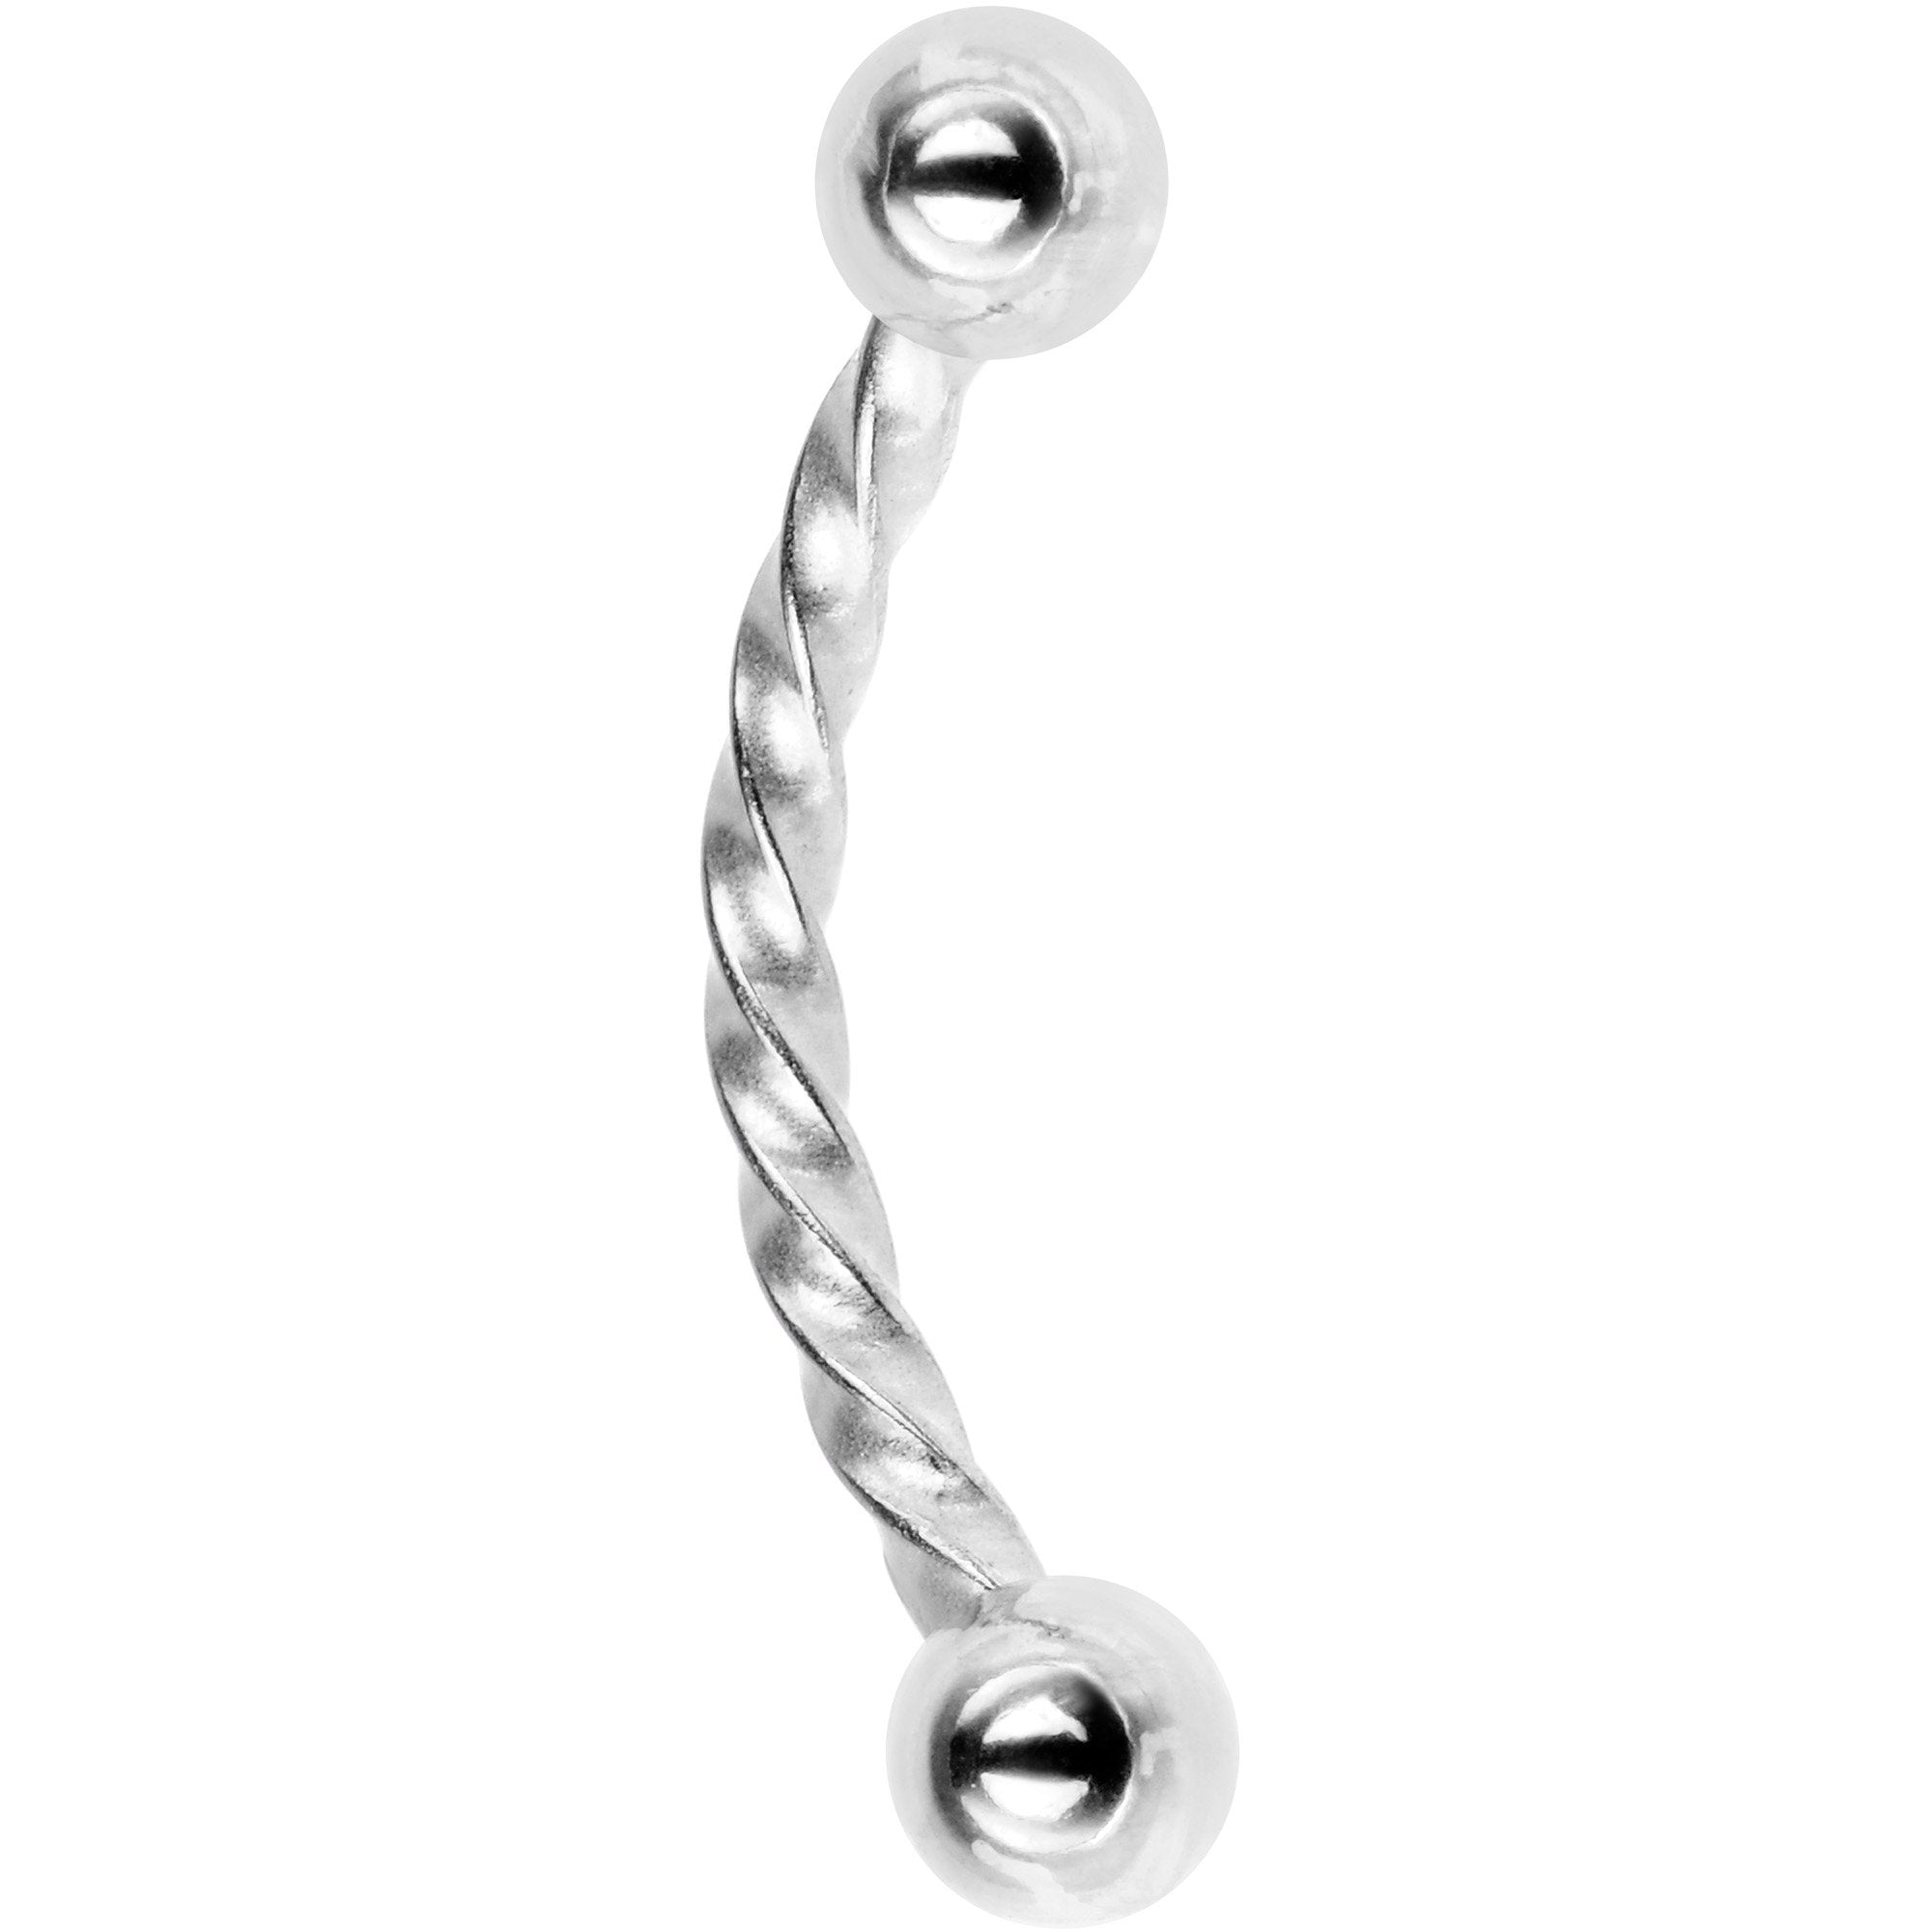 16 Gauge 3/8 Seriously Twisted Curved Eyebrow Ring